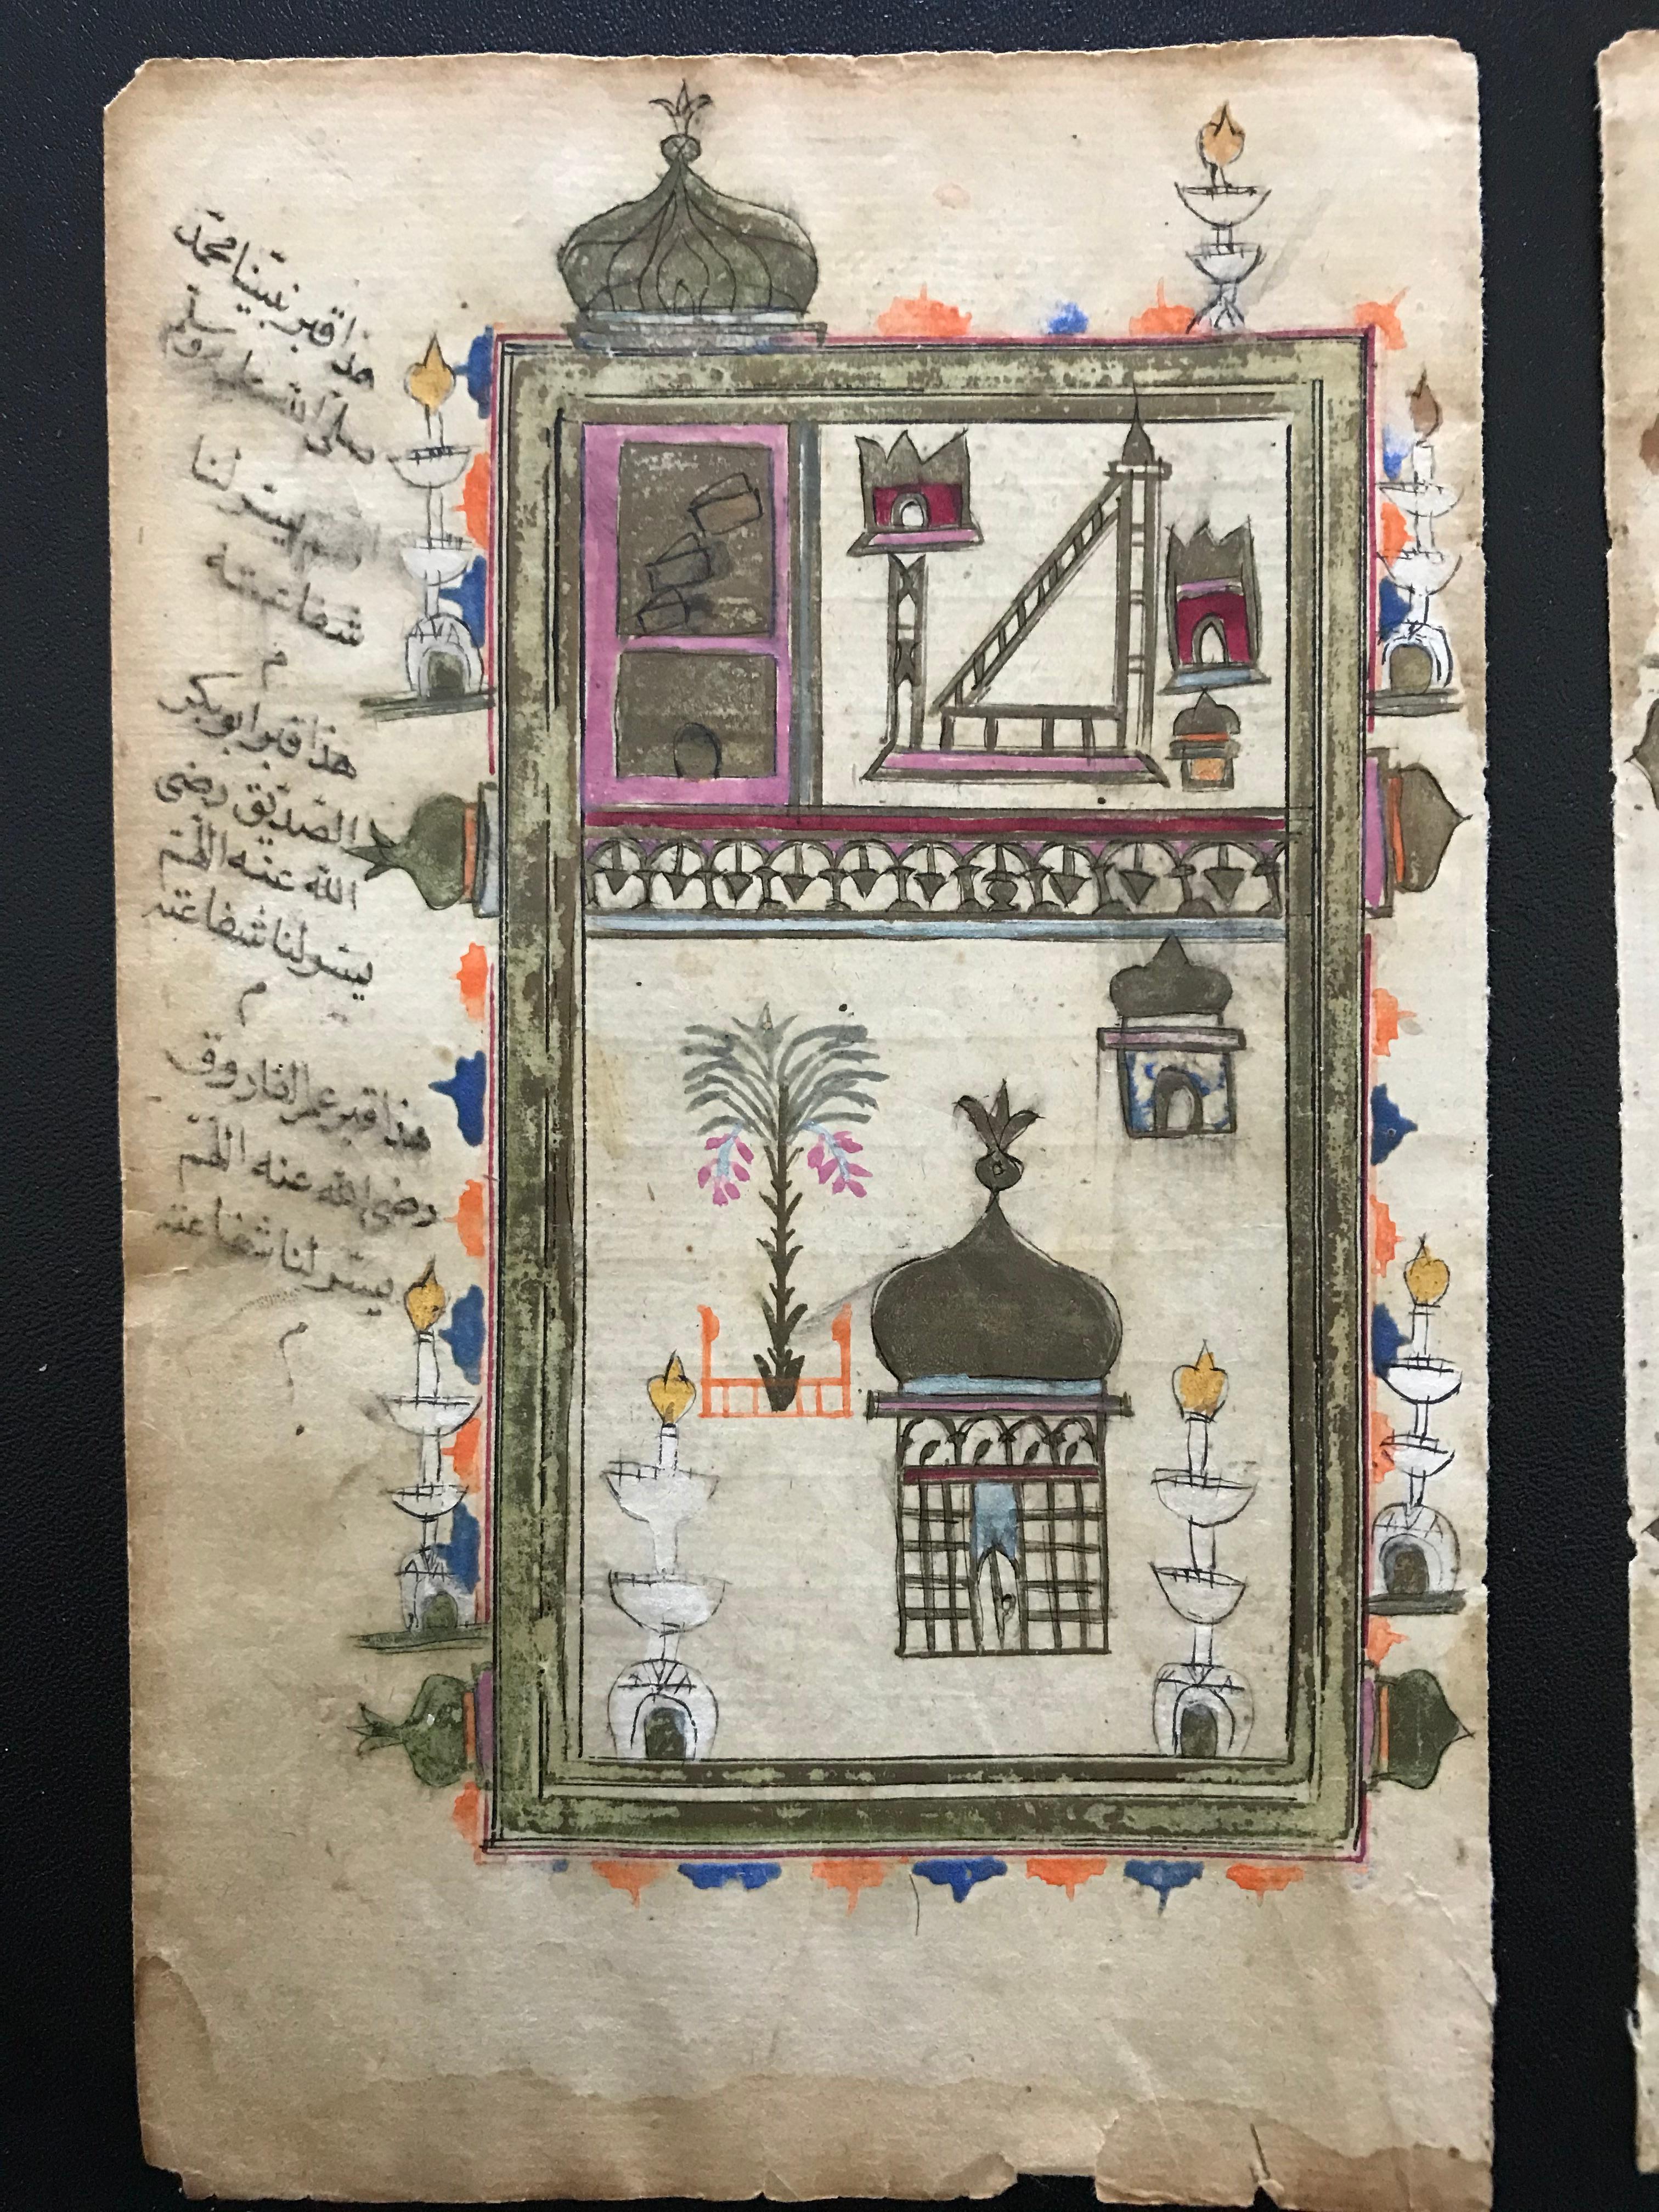 Two illustrated leaves from al-Jazuli’s prayer book, Dala’il al-Khayrat, depicting the Qa’ba at Mecca and the mosque at Medina, Ottoman Turkish, late 18th century. These wonderful drawings with naive perspective are thoroughly charming. They will